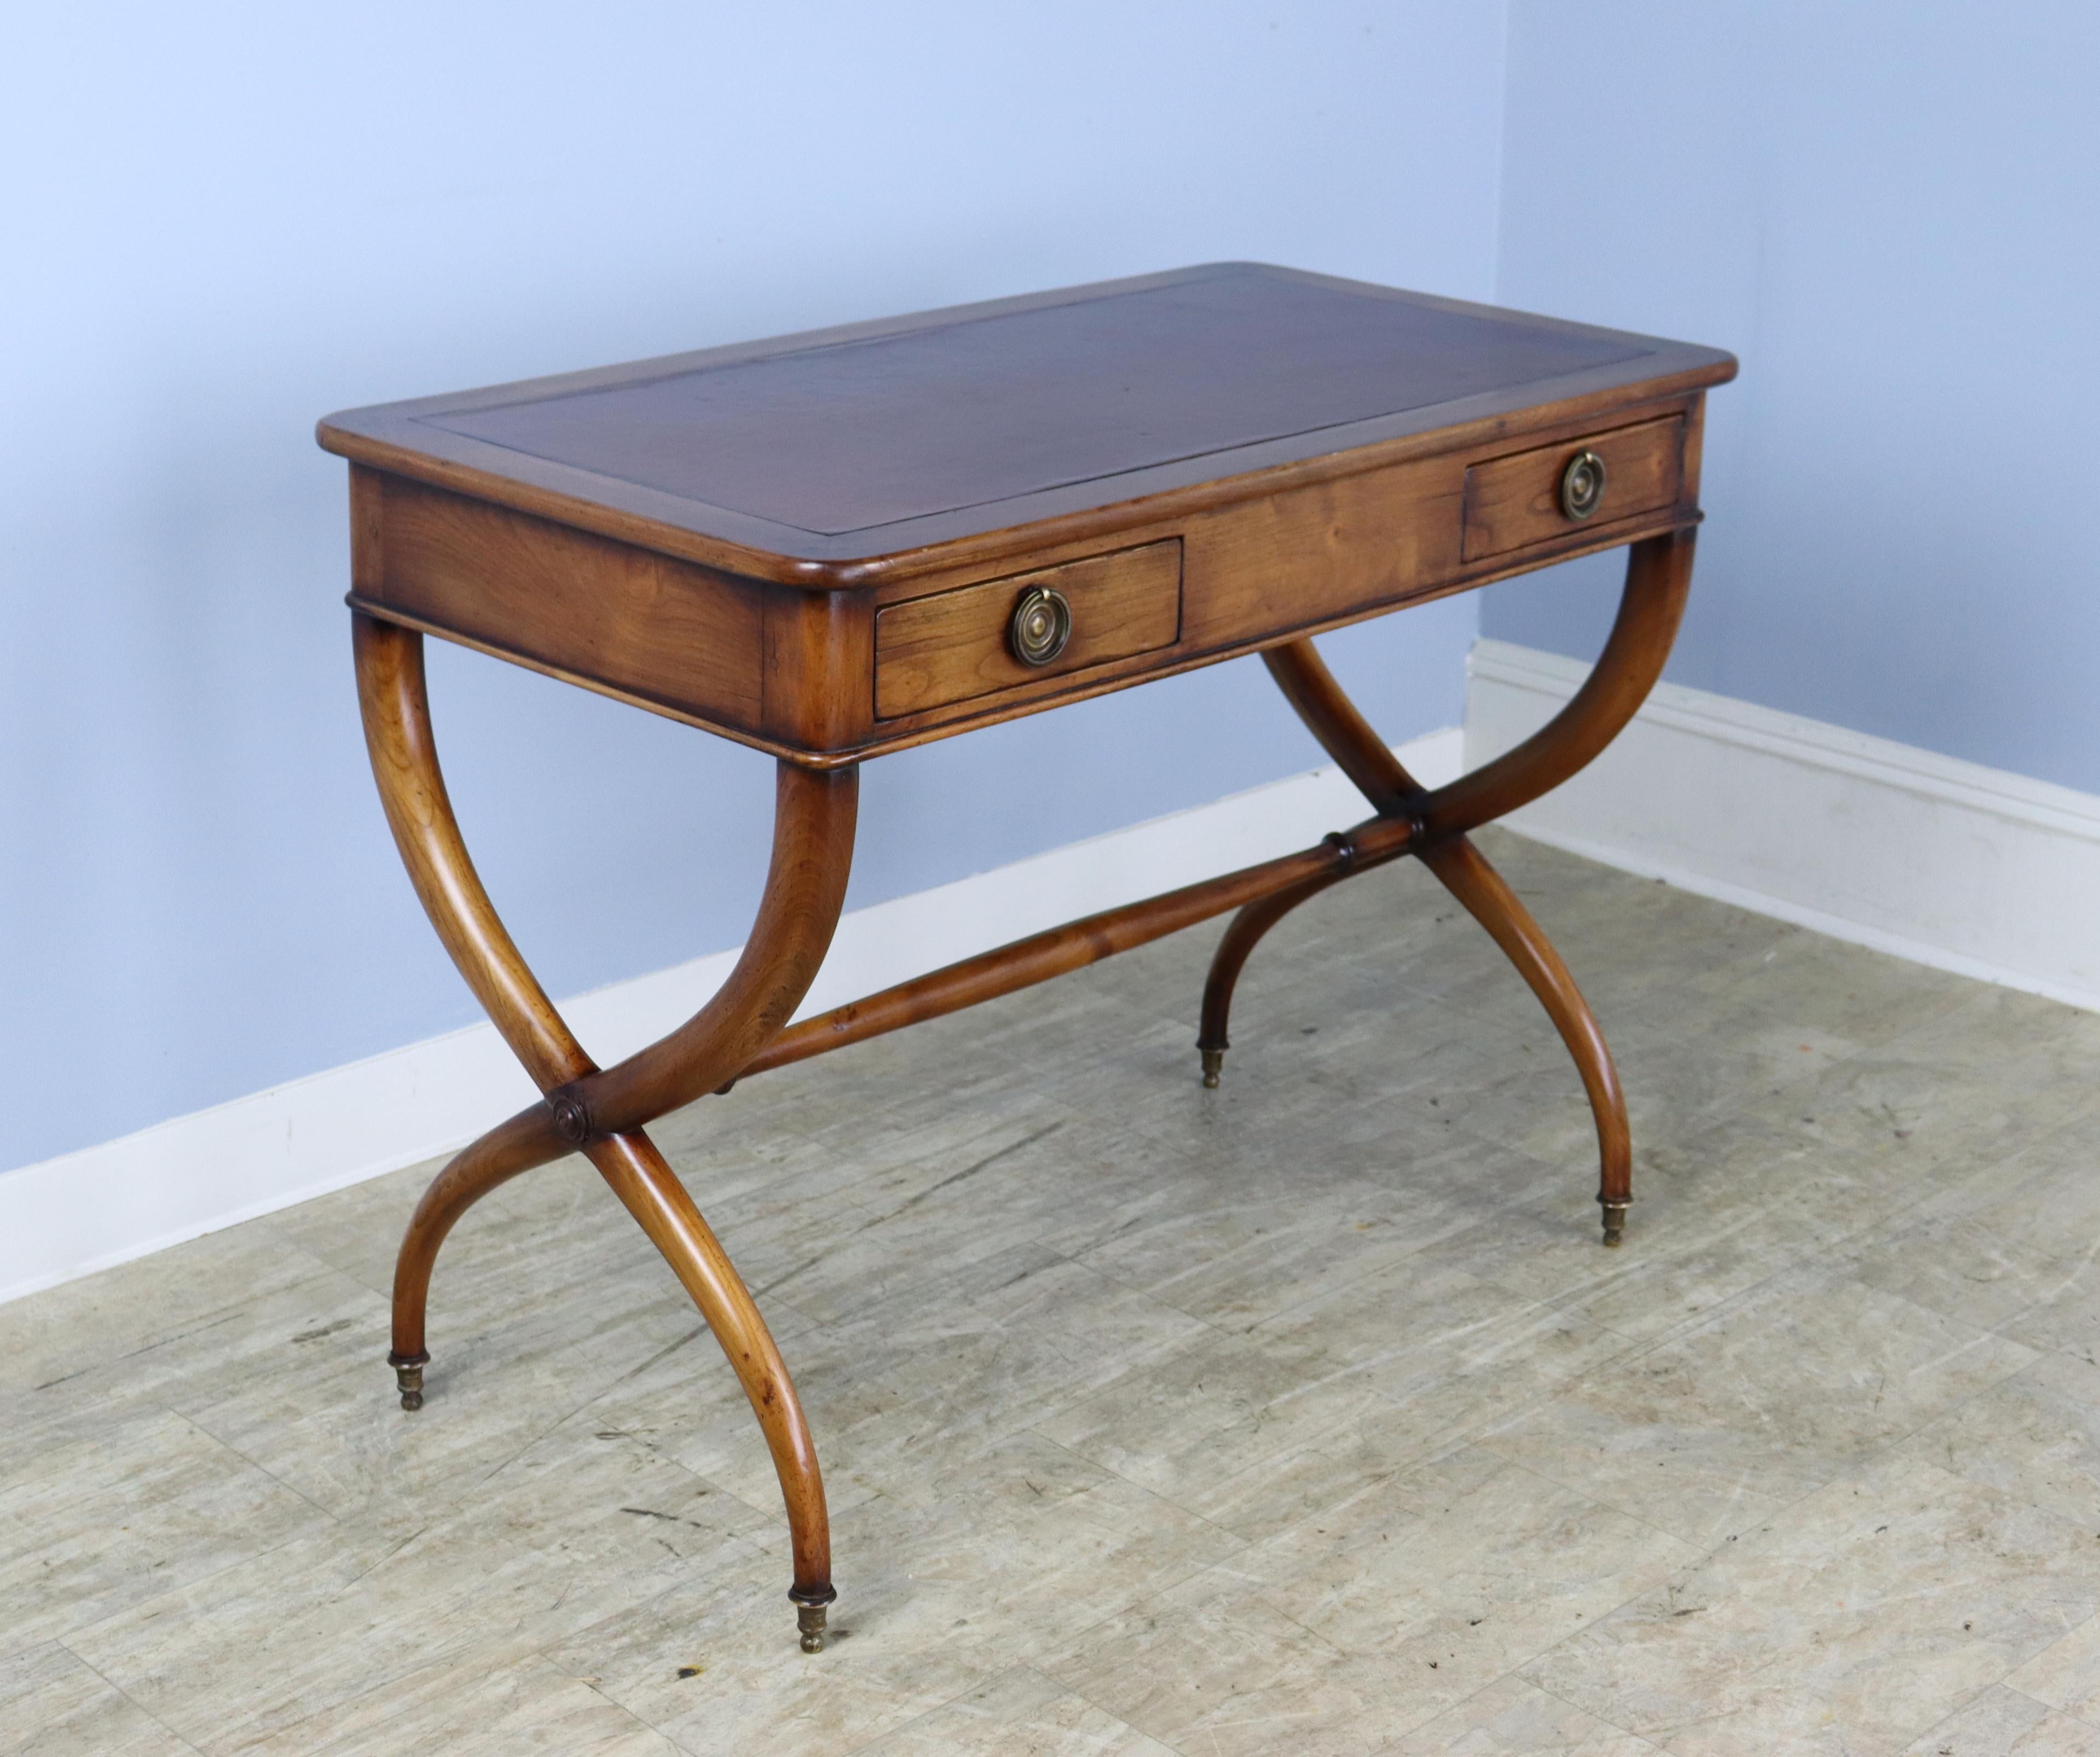 A fabulous mahogany writing table with original leather top and crossed sabre legs. The color and patina of the legs is very good. Original brass feet.